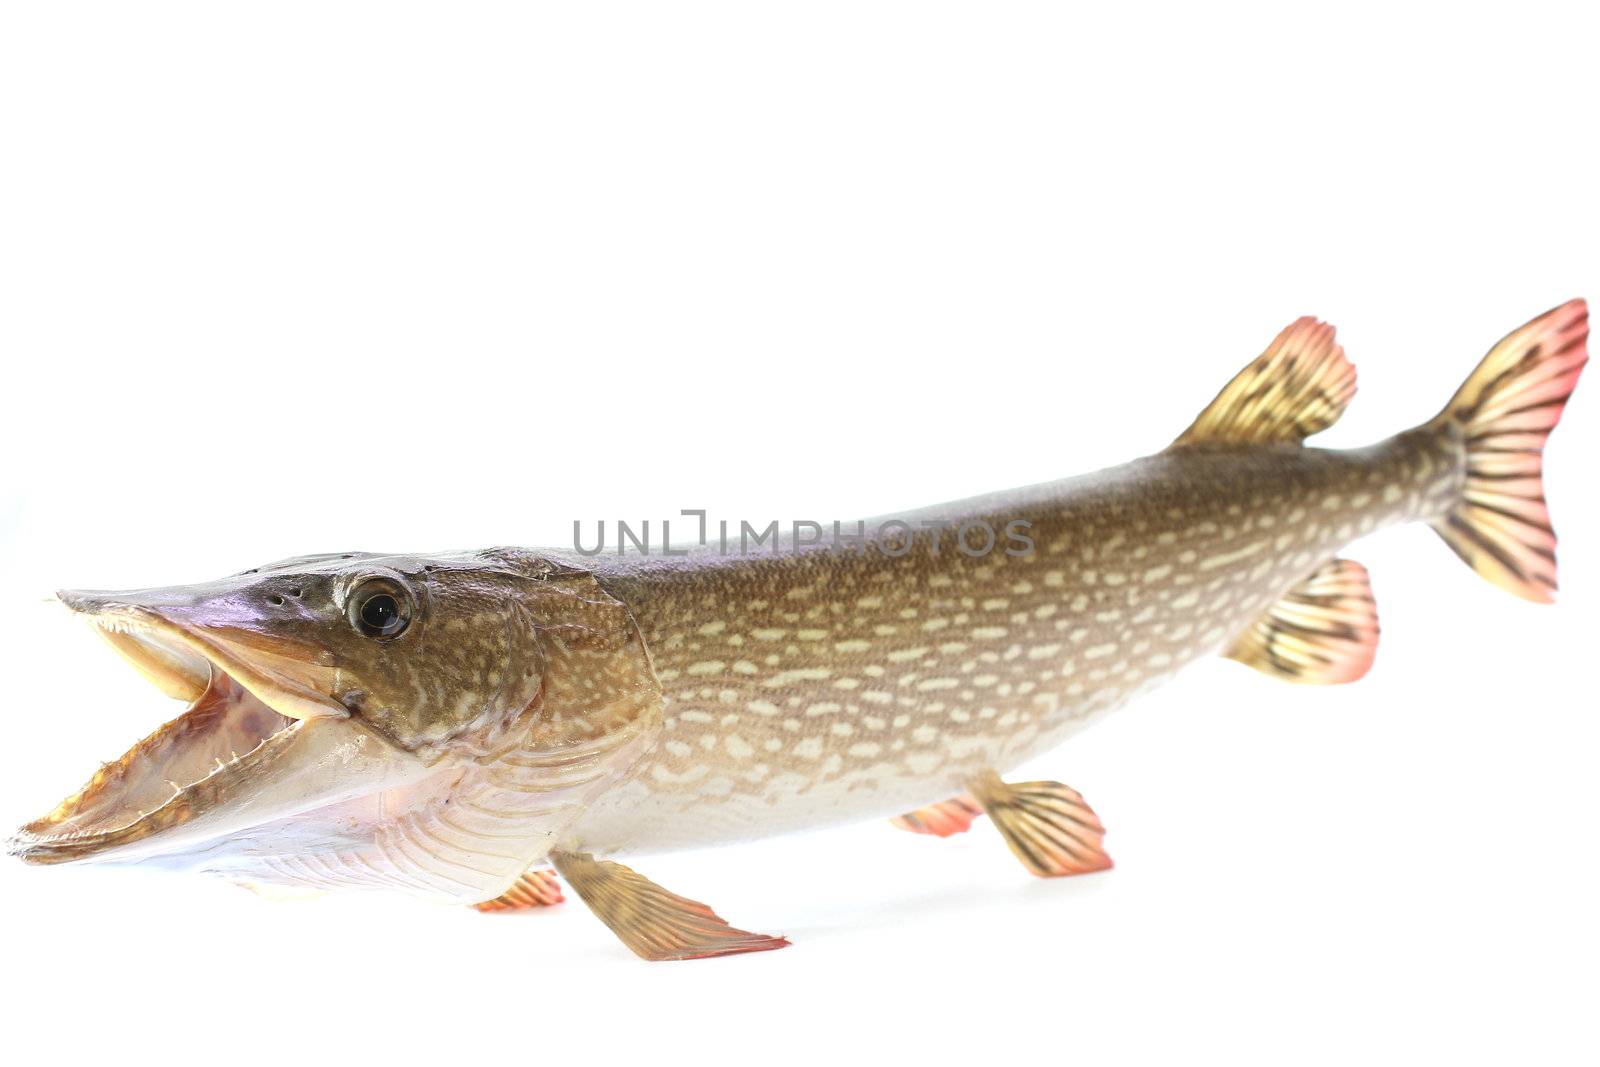 Mounted Northern Pike by abhbah05